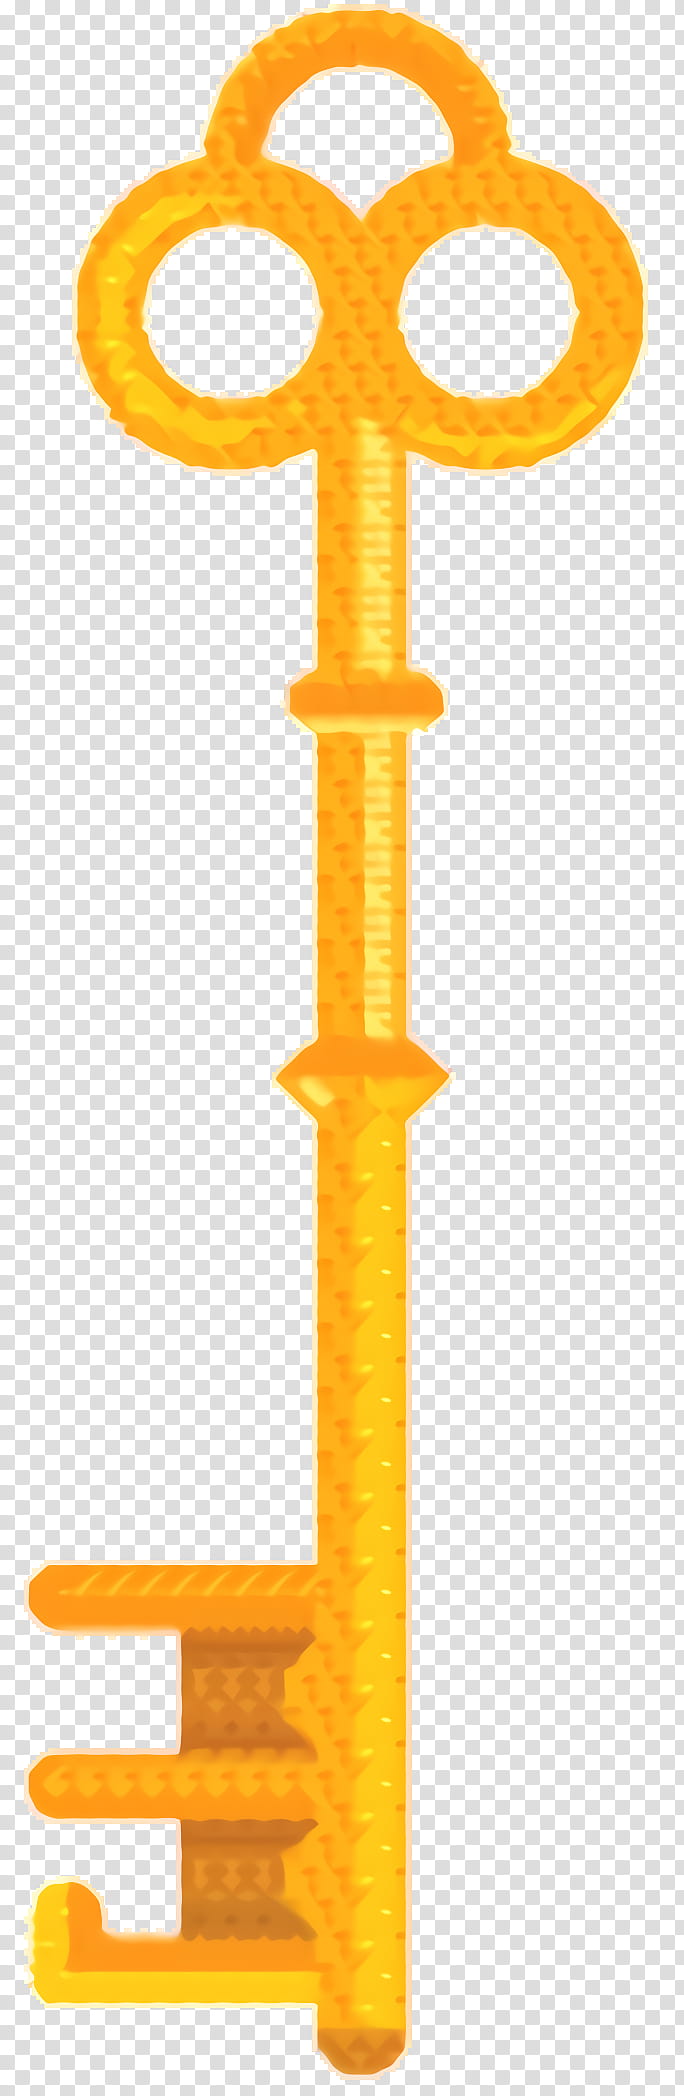 Line Yellow Angle Sword Transparent Background Png Clipart Hiclipart - roblox logo sword line transparent background png clipart hiclipart